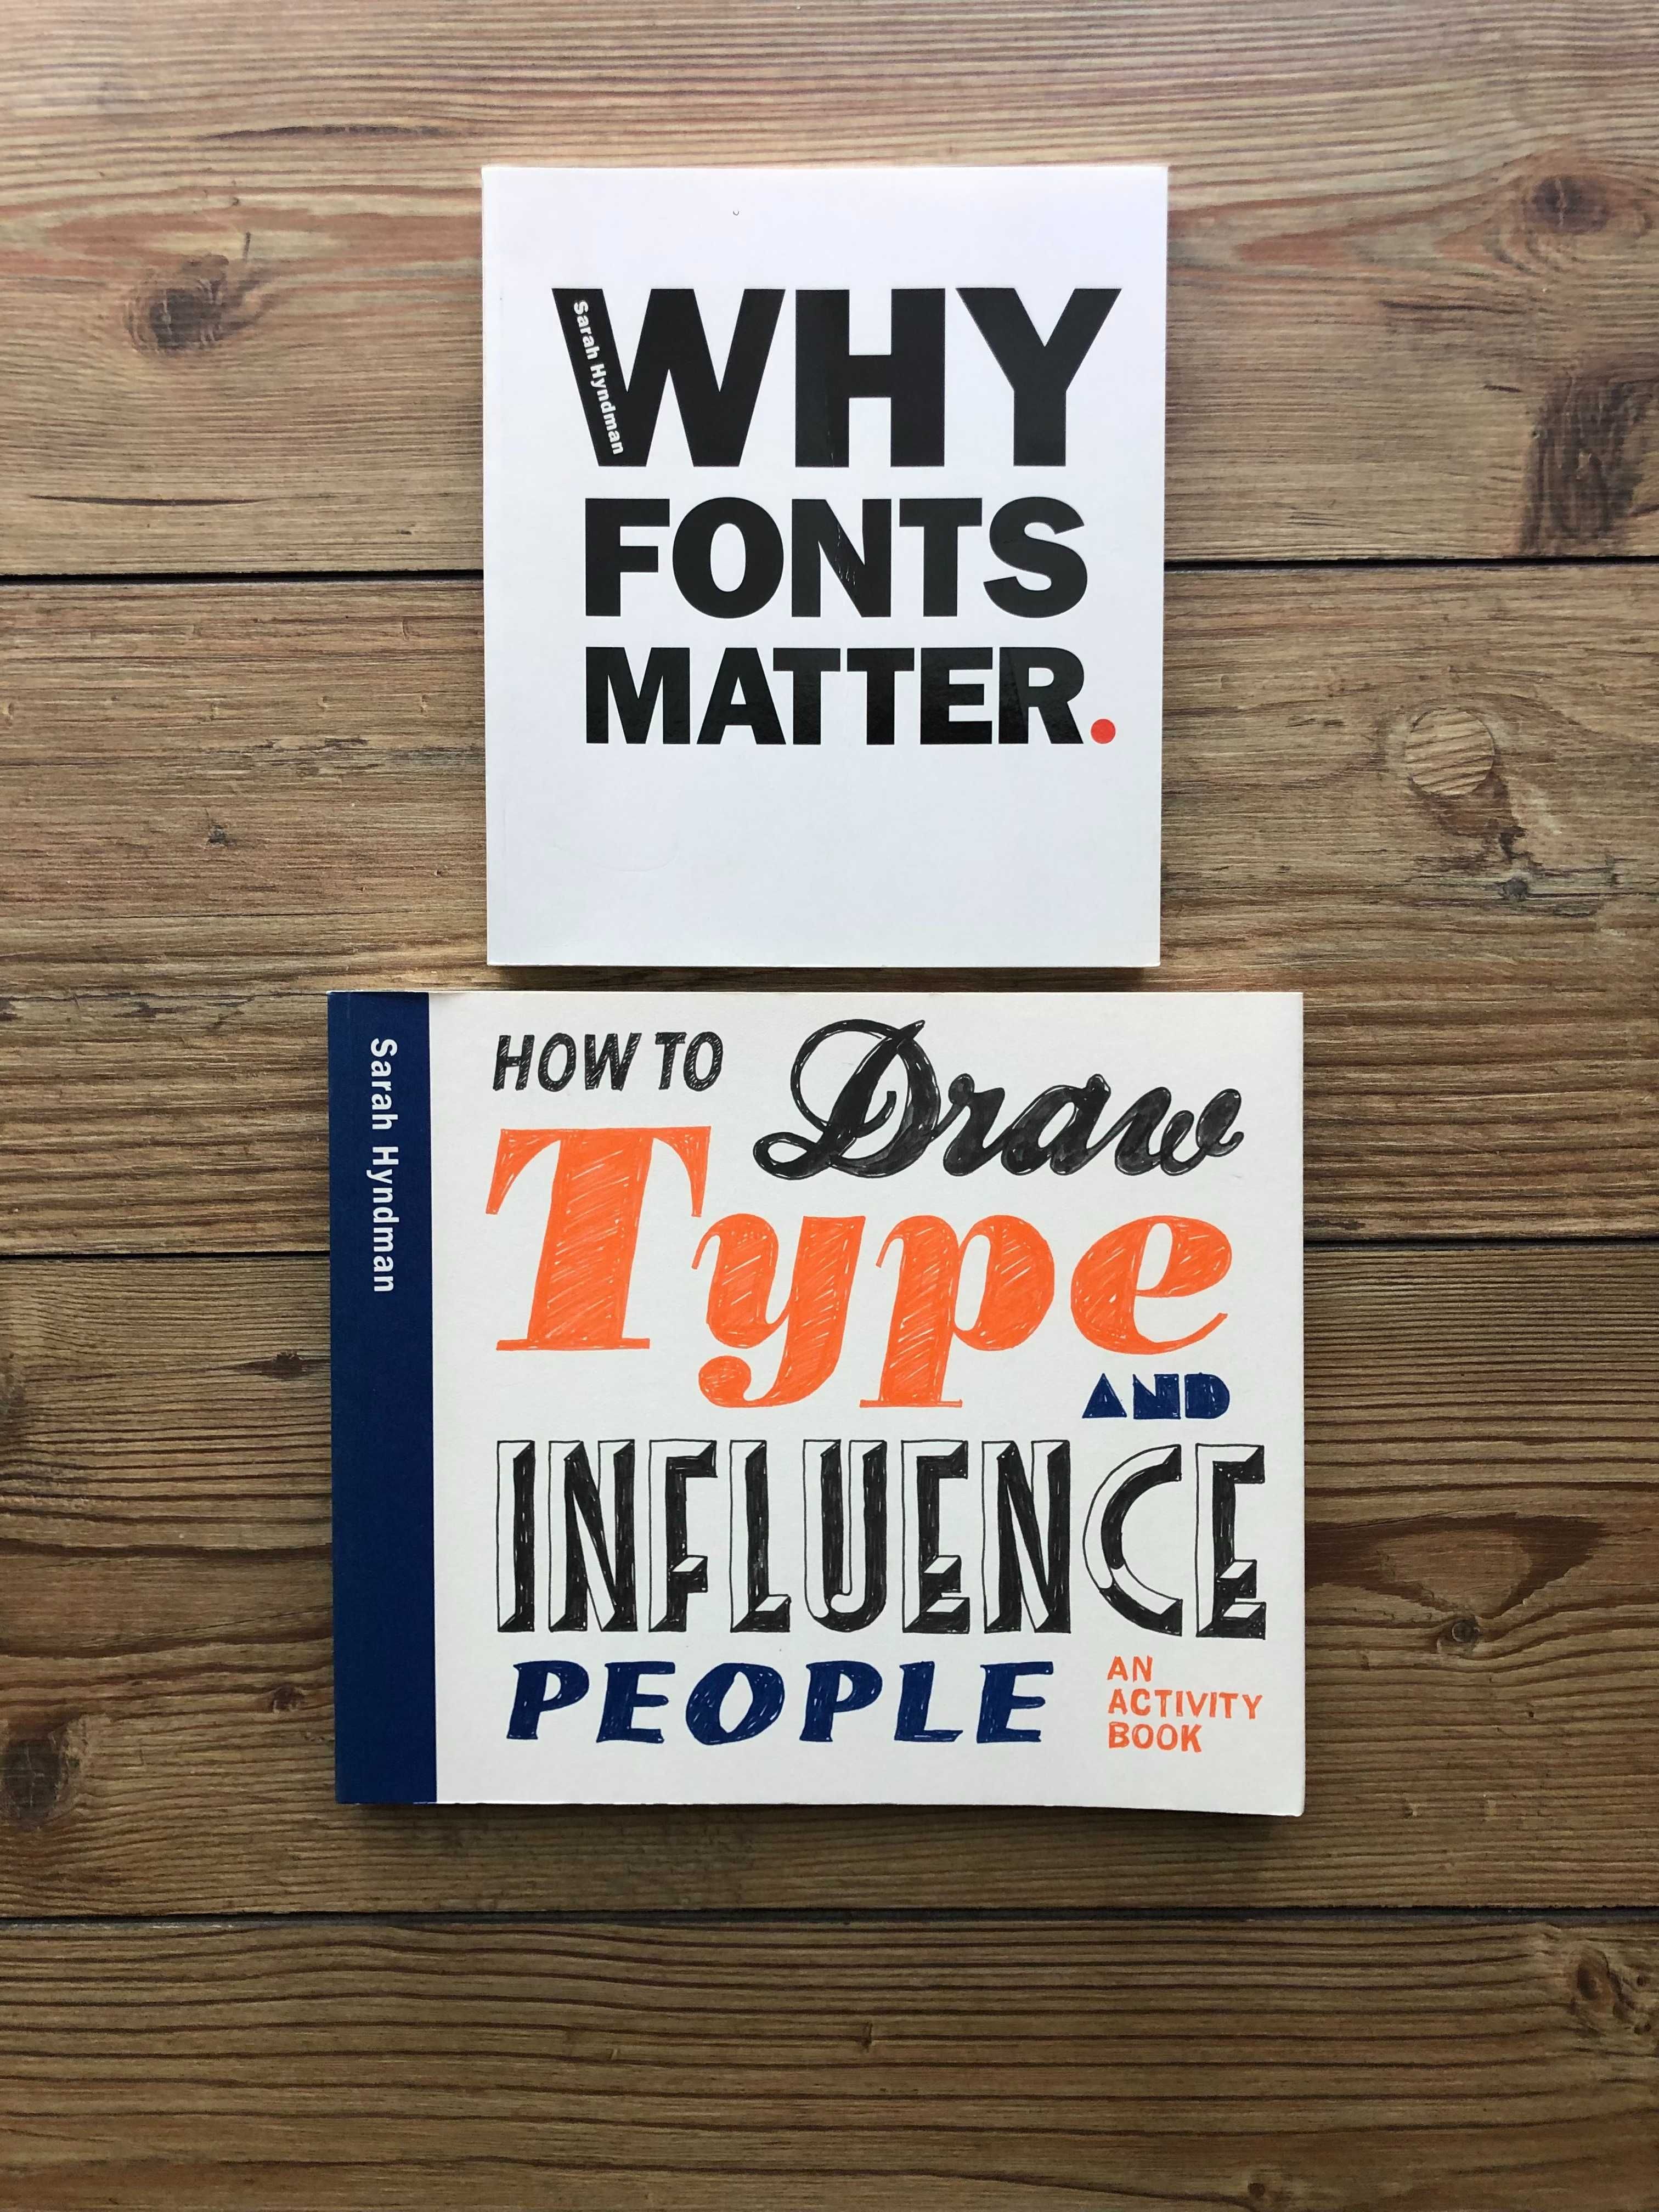 Pack "Why Fonts Matter" e "How To Draw Type and Influence People"